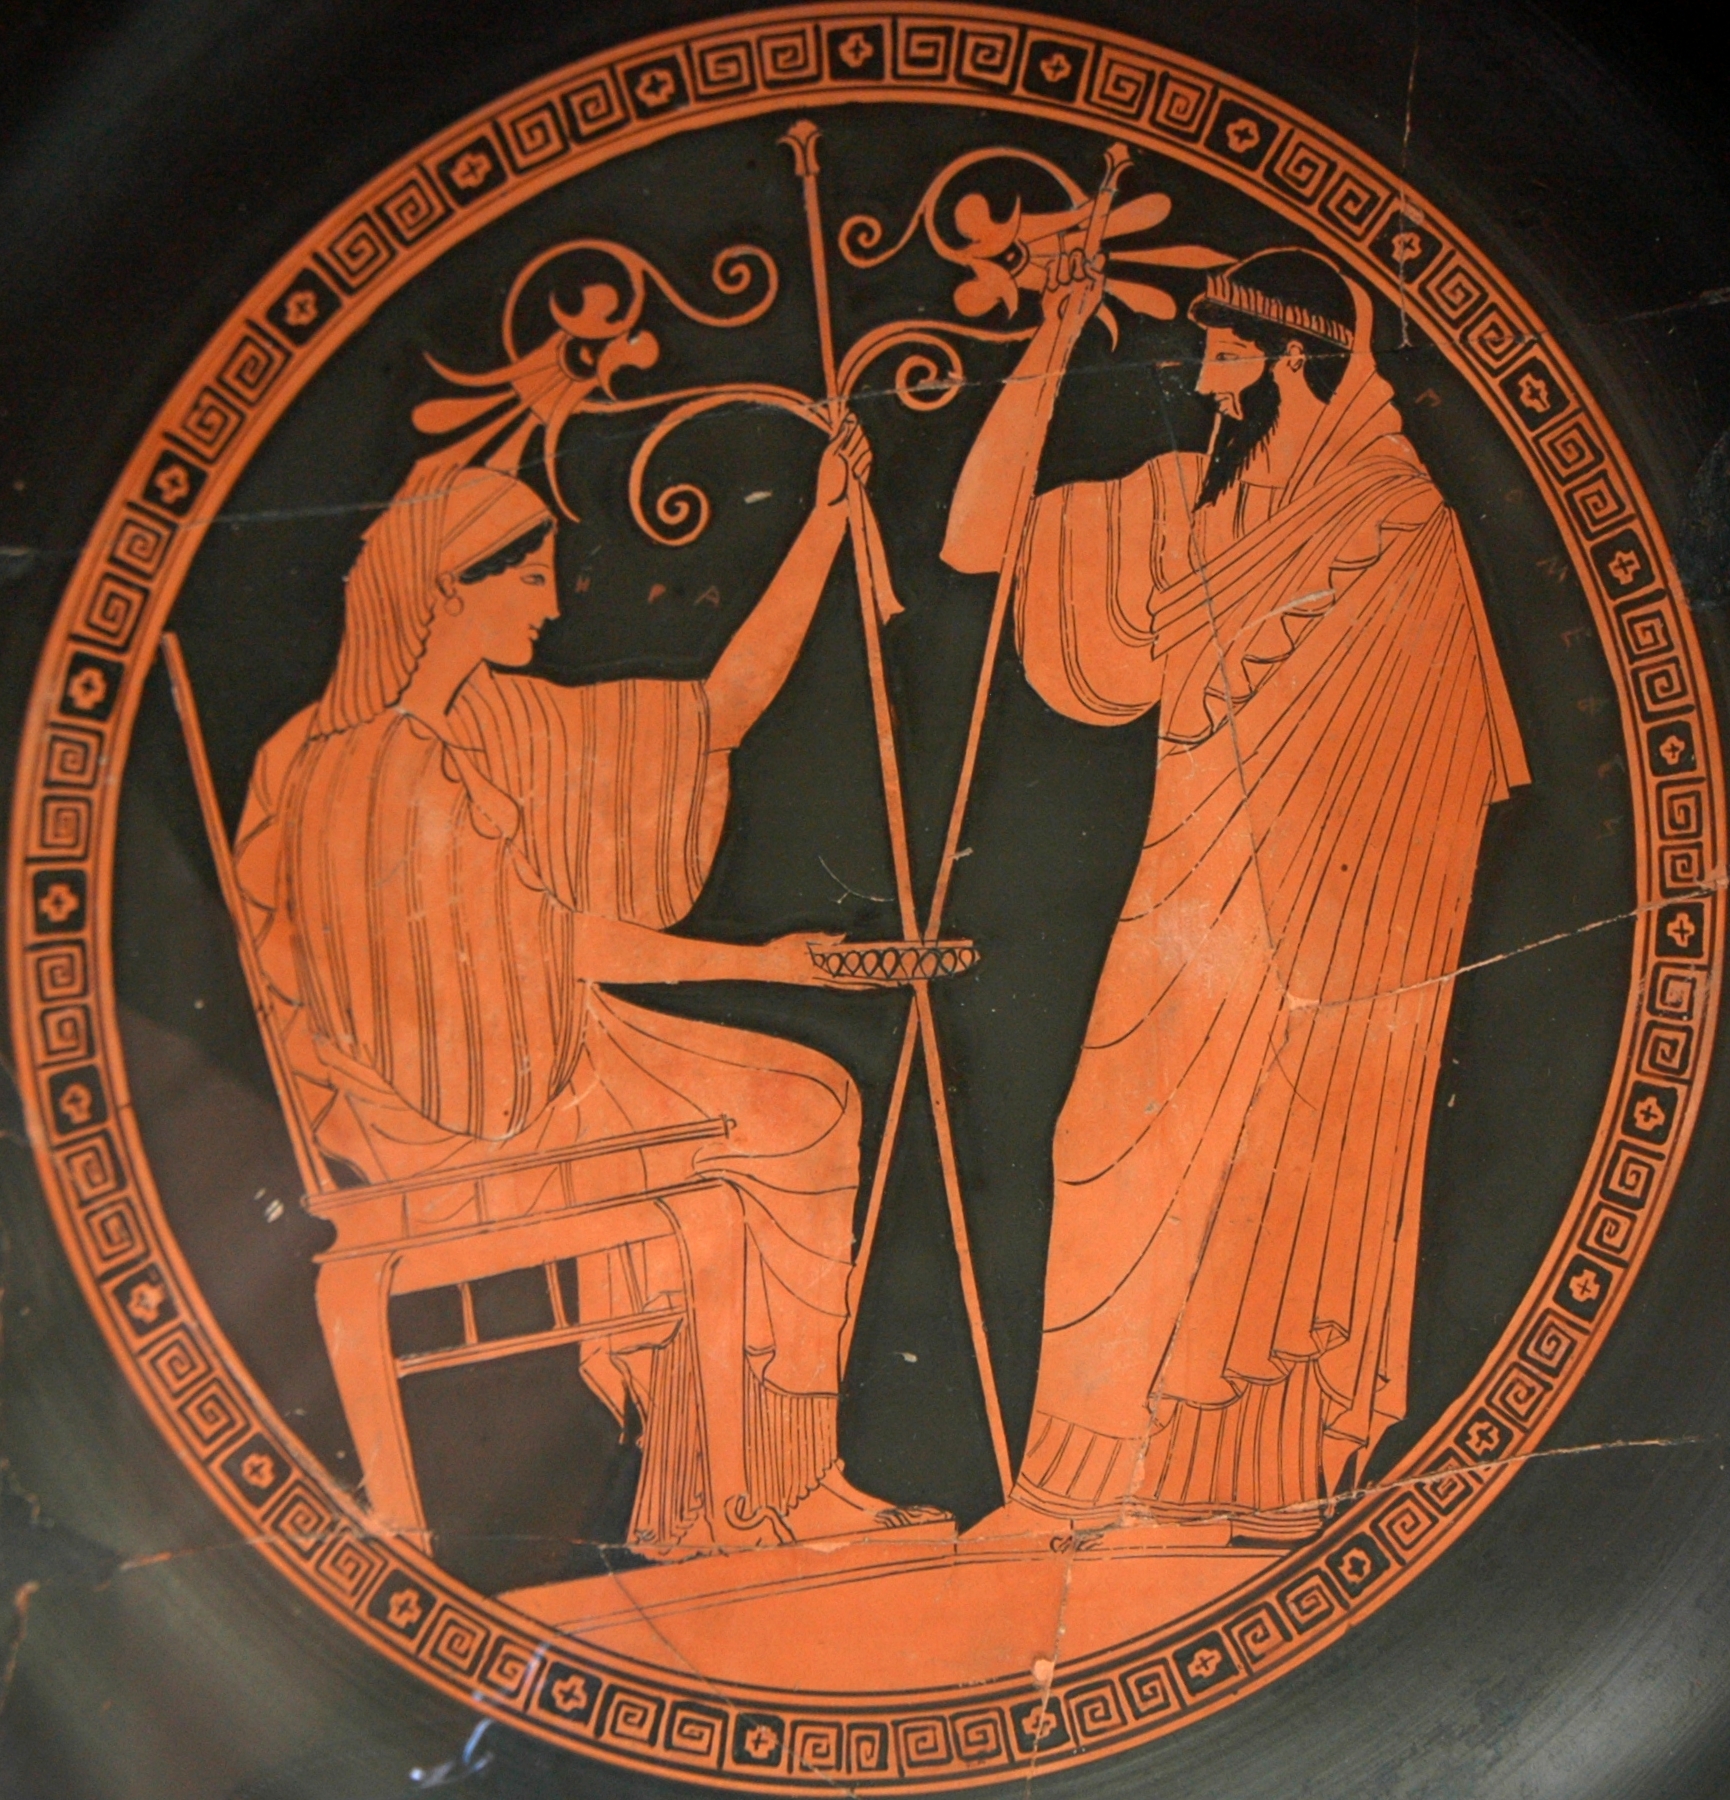 Throned and robed Hera, holding a tall scepter, sits before Prometheus